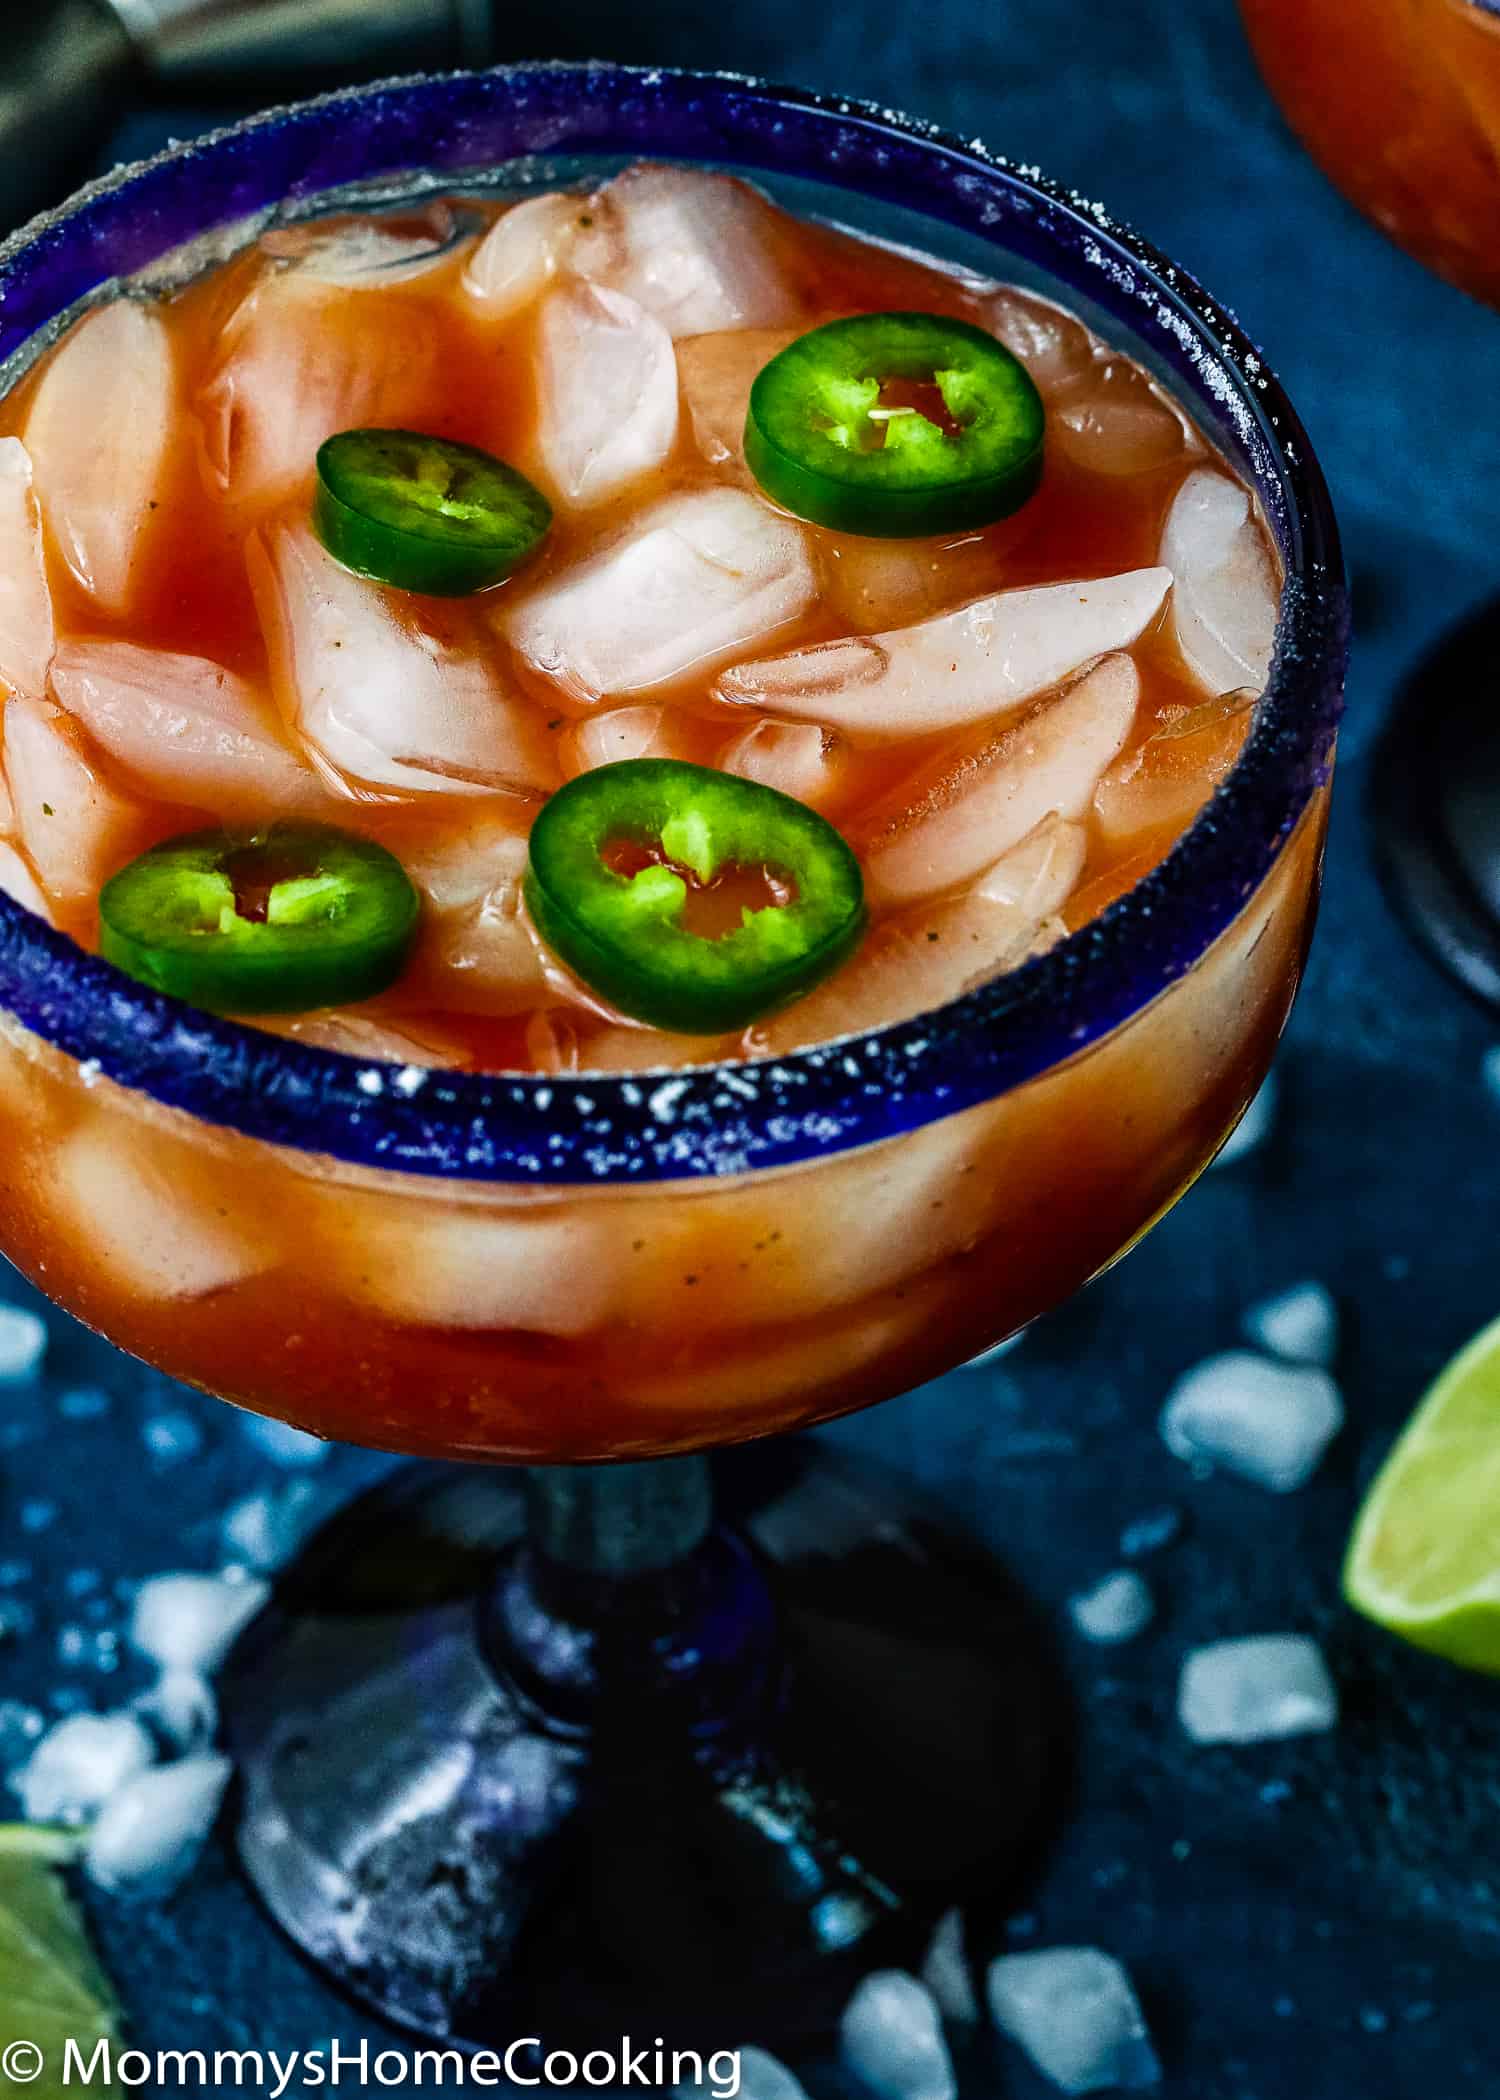 This Spicy Salsa Margarita is boozy, refreshing, citrusy and totally irresistible! This cocktail taste like the perfect combination of a bloody mary and a margarita, all in one sip. Made with fresh salsa, tequila, agave and lime, this delicious and different cocktail will knock your guests' socks off! https://mommyshomecooking.com